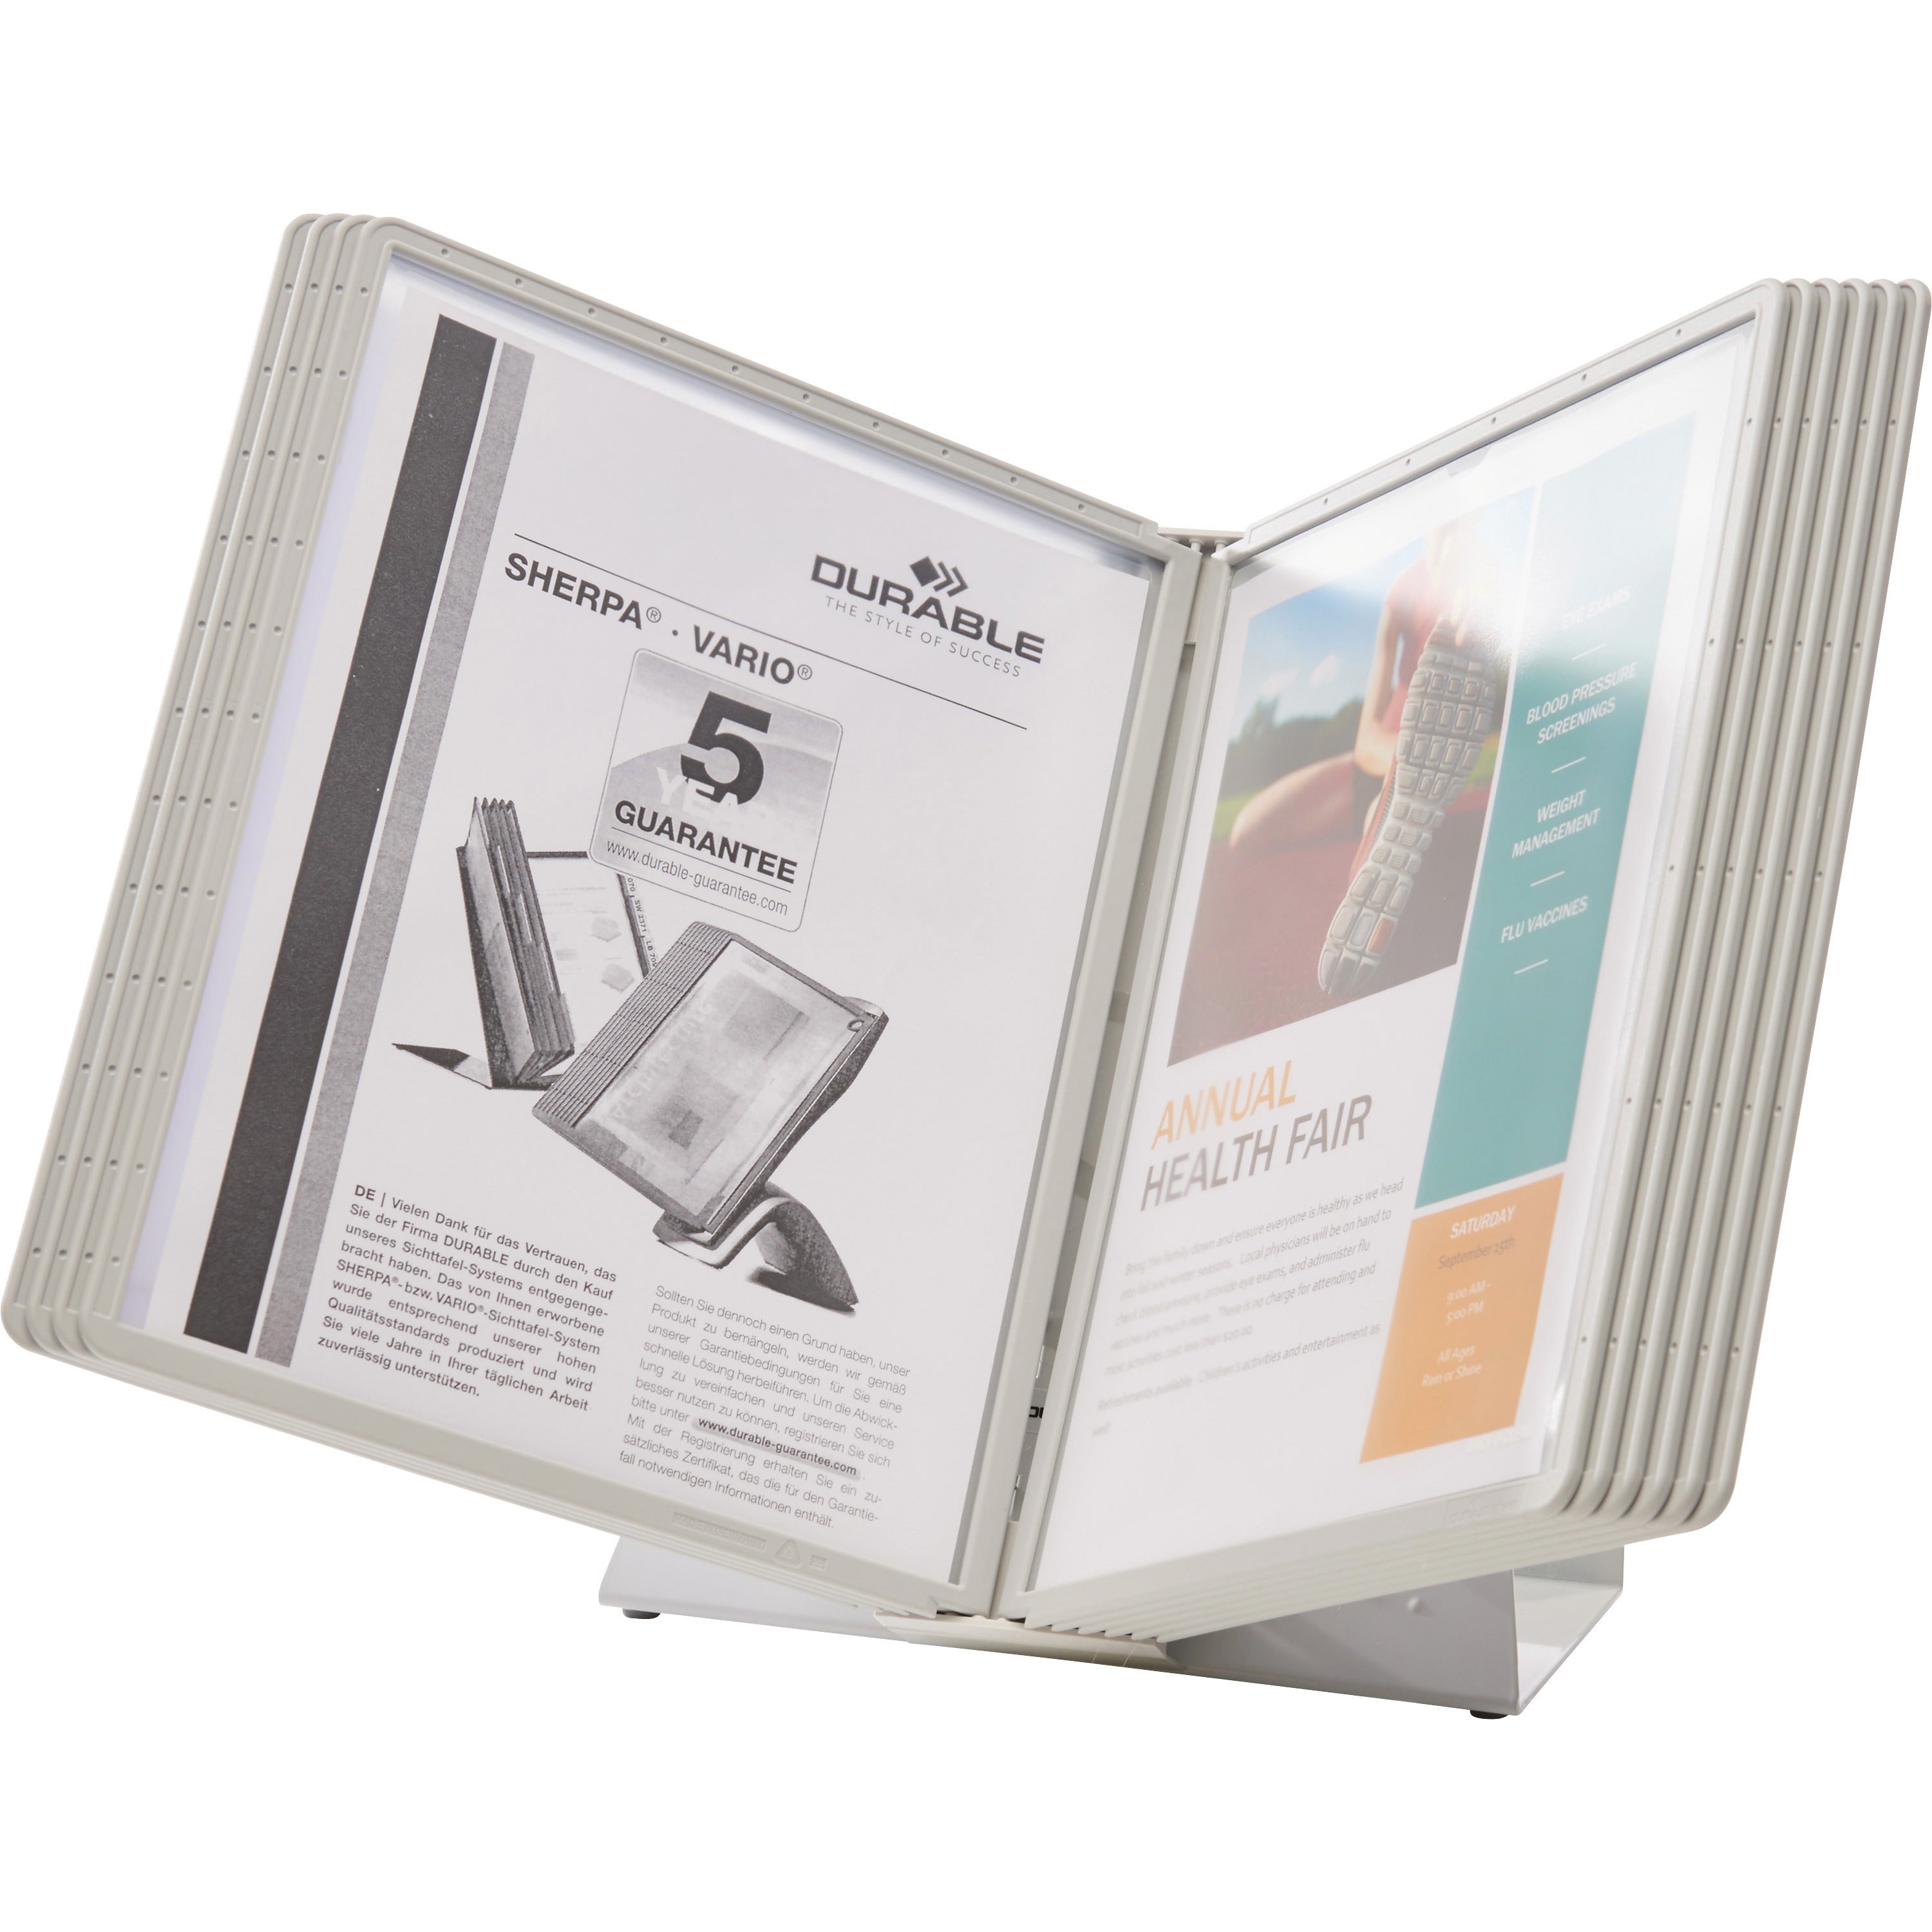 DURABLE VARIO Antimicrobial Desktop Reference Display System - Desktop - 10 Double Sided Panels - Letter Size - Antimicrobial Polypropylene Sleeves - Anti-Reflective/Non-Glare - Gray - 